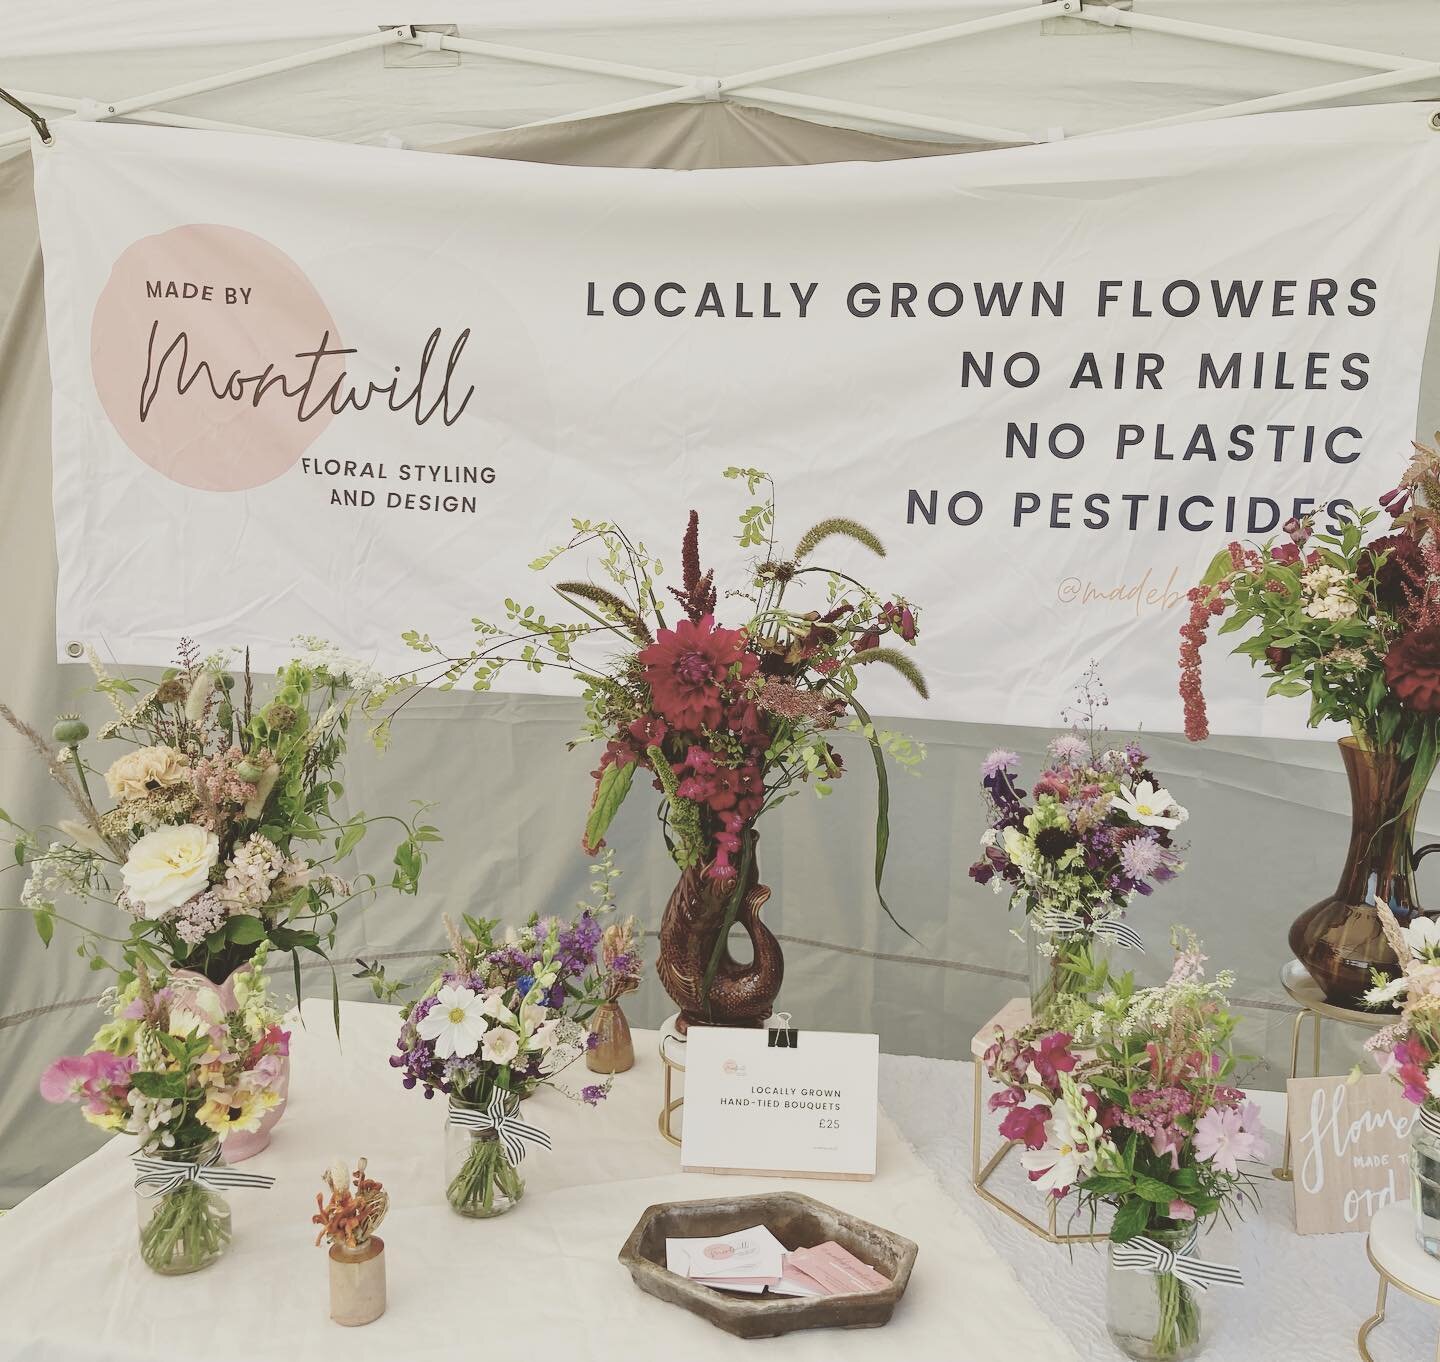 Another gorgeous market set up in Harpenden at the Sustainable Market this weekend do pop down before it gets too hot and take some flowers home out of this heat!! 🔥🔥🔥 #sustainableflowers #noplastic #grownnotflown✈️ #localfarmflowers #undertheflor